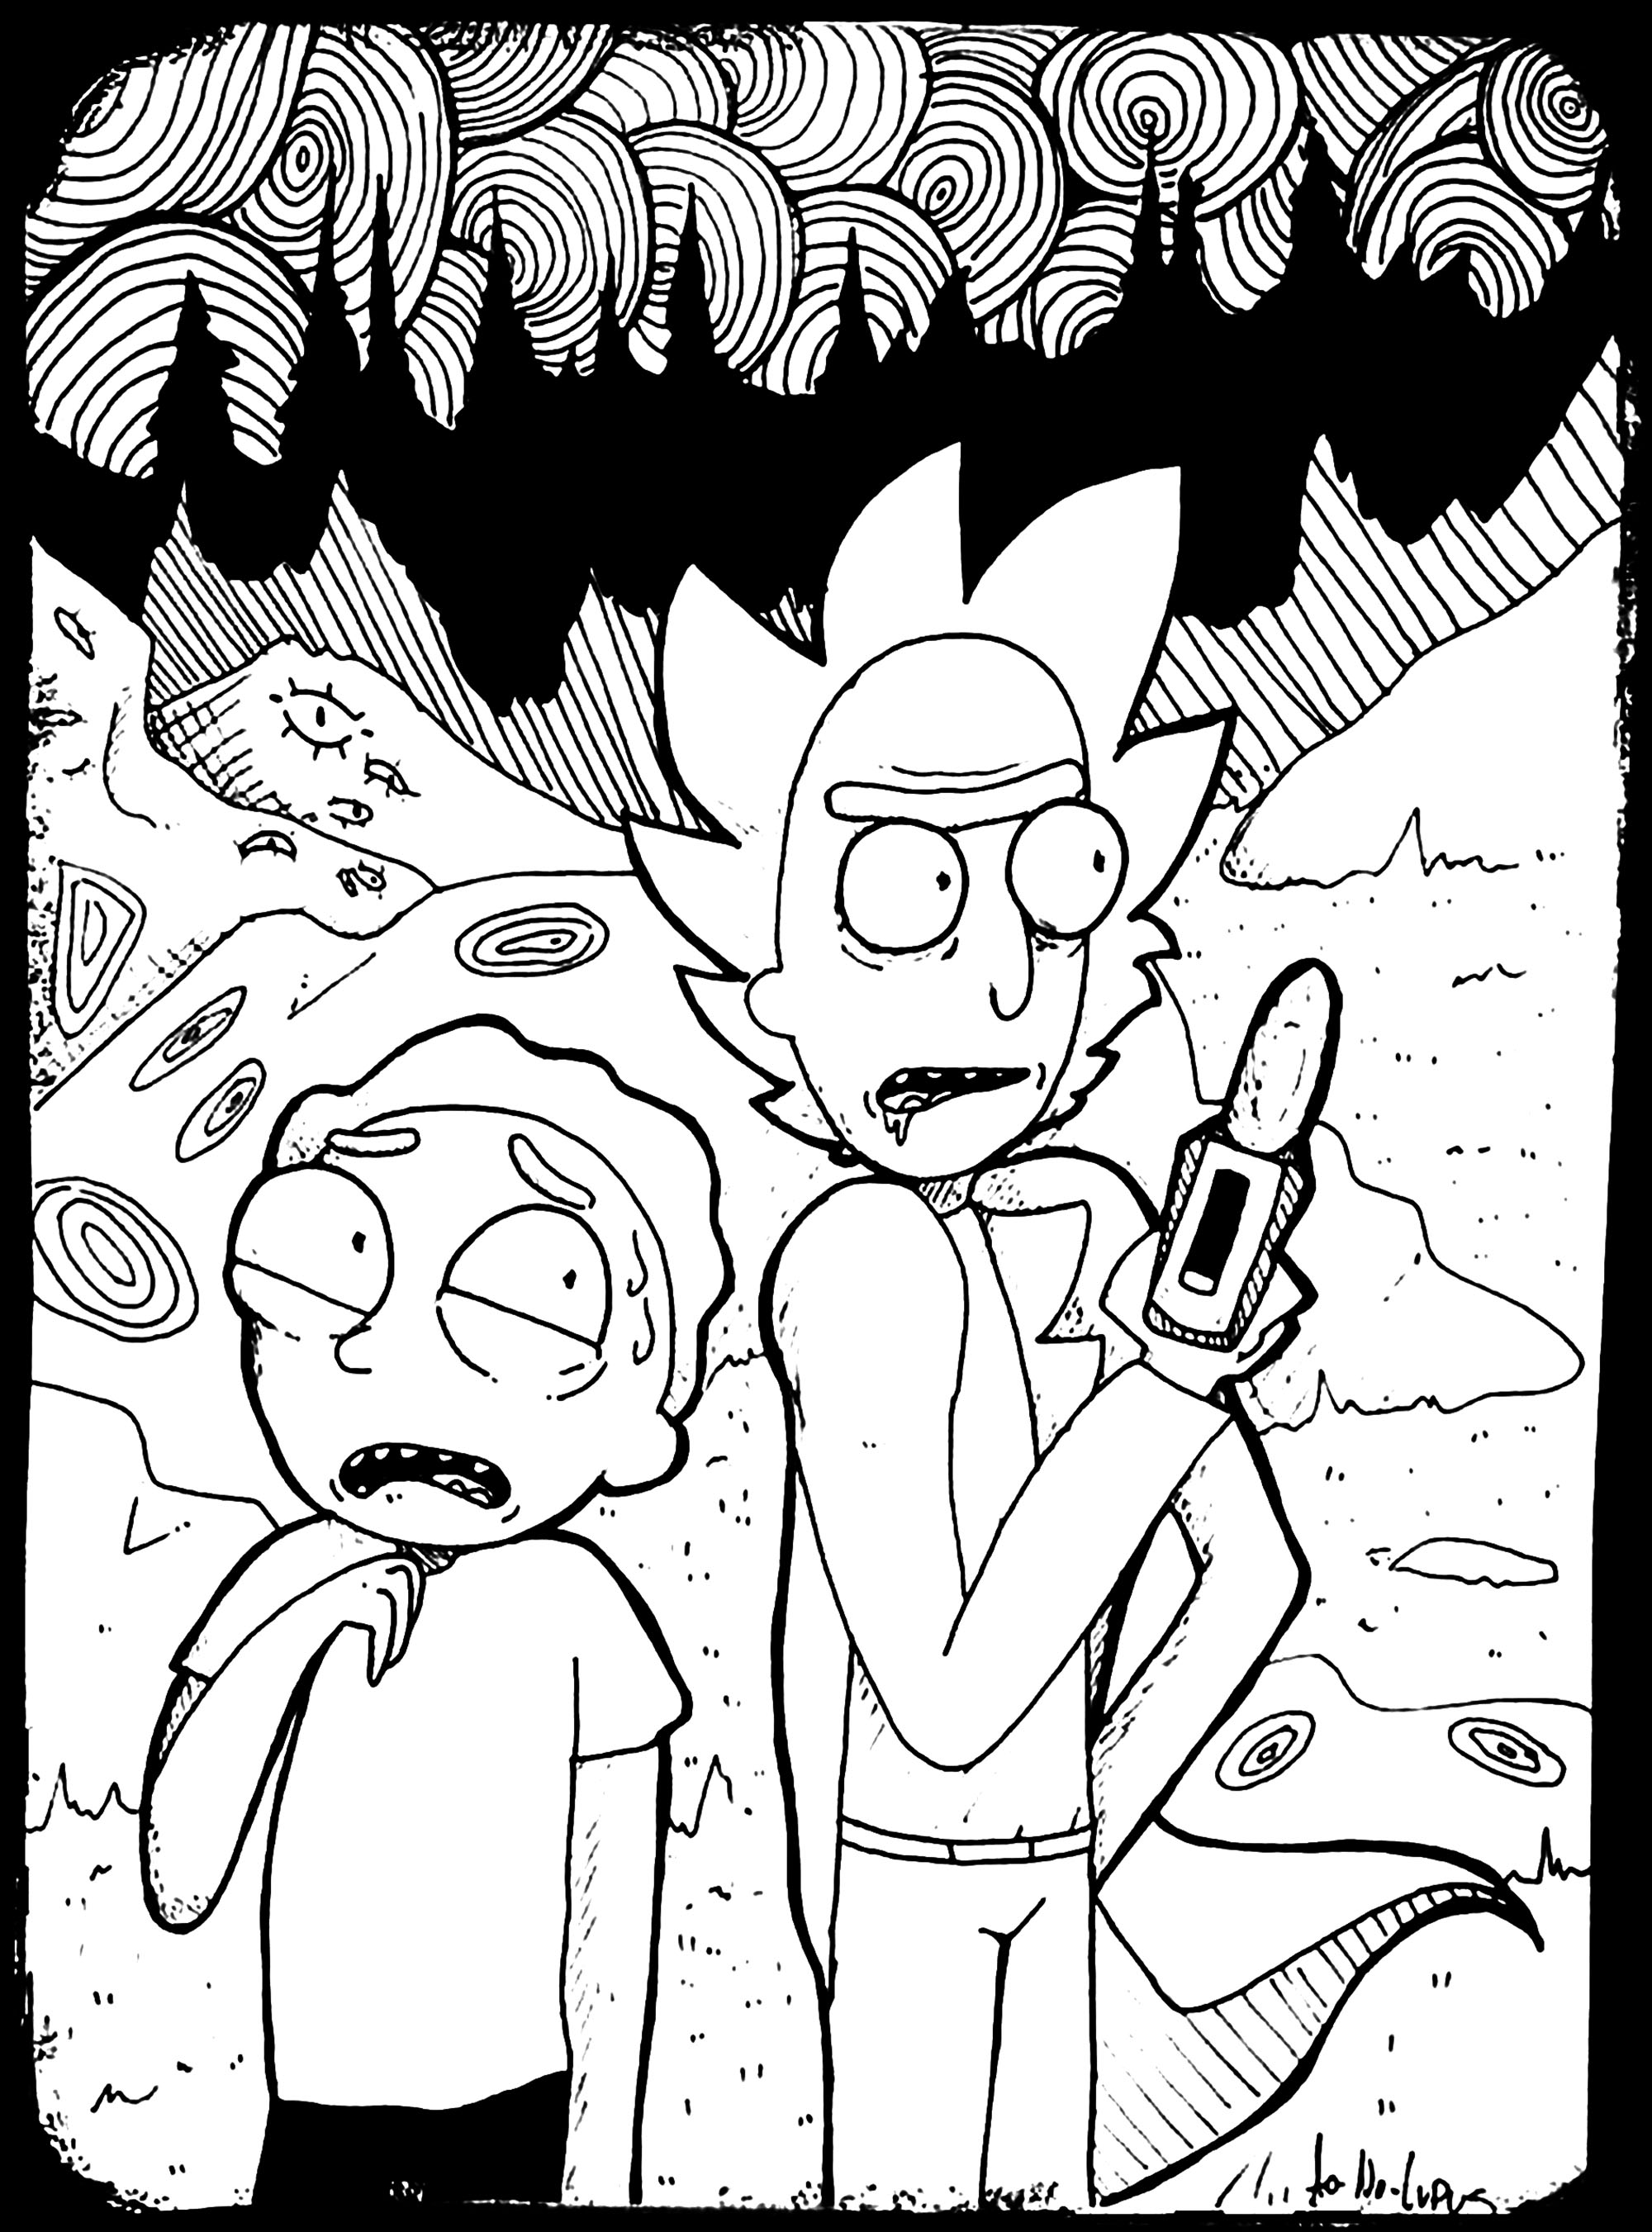 Rick and morty - Coloring Pages for Adults